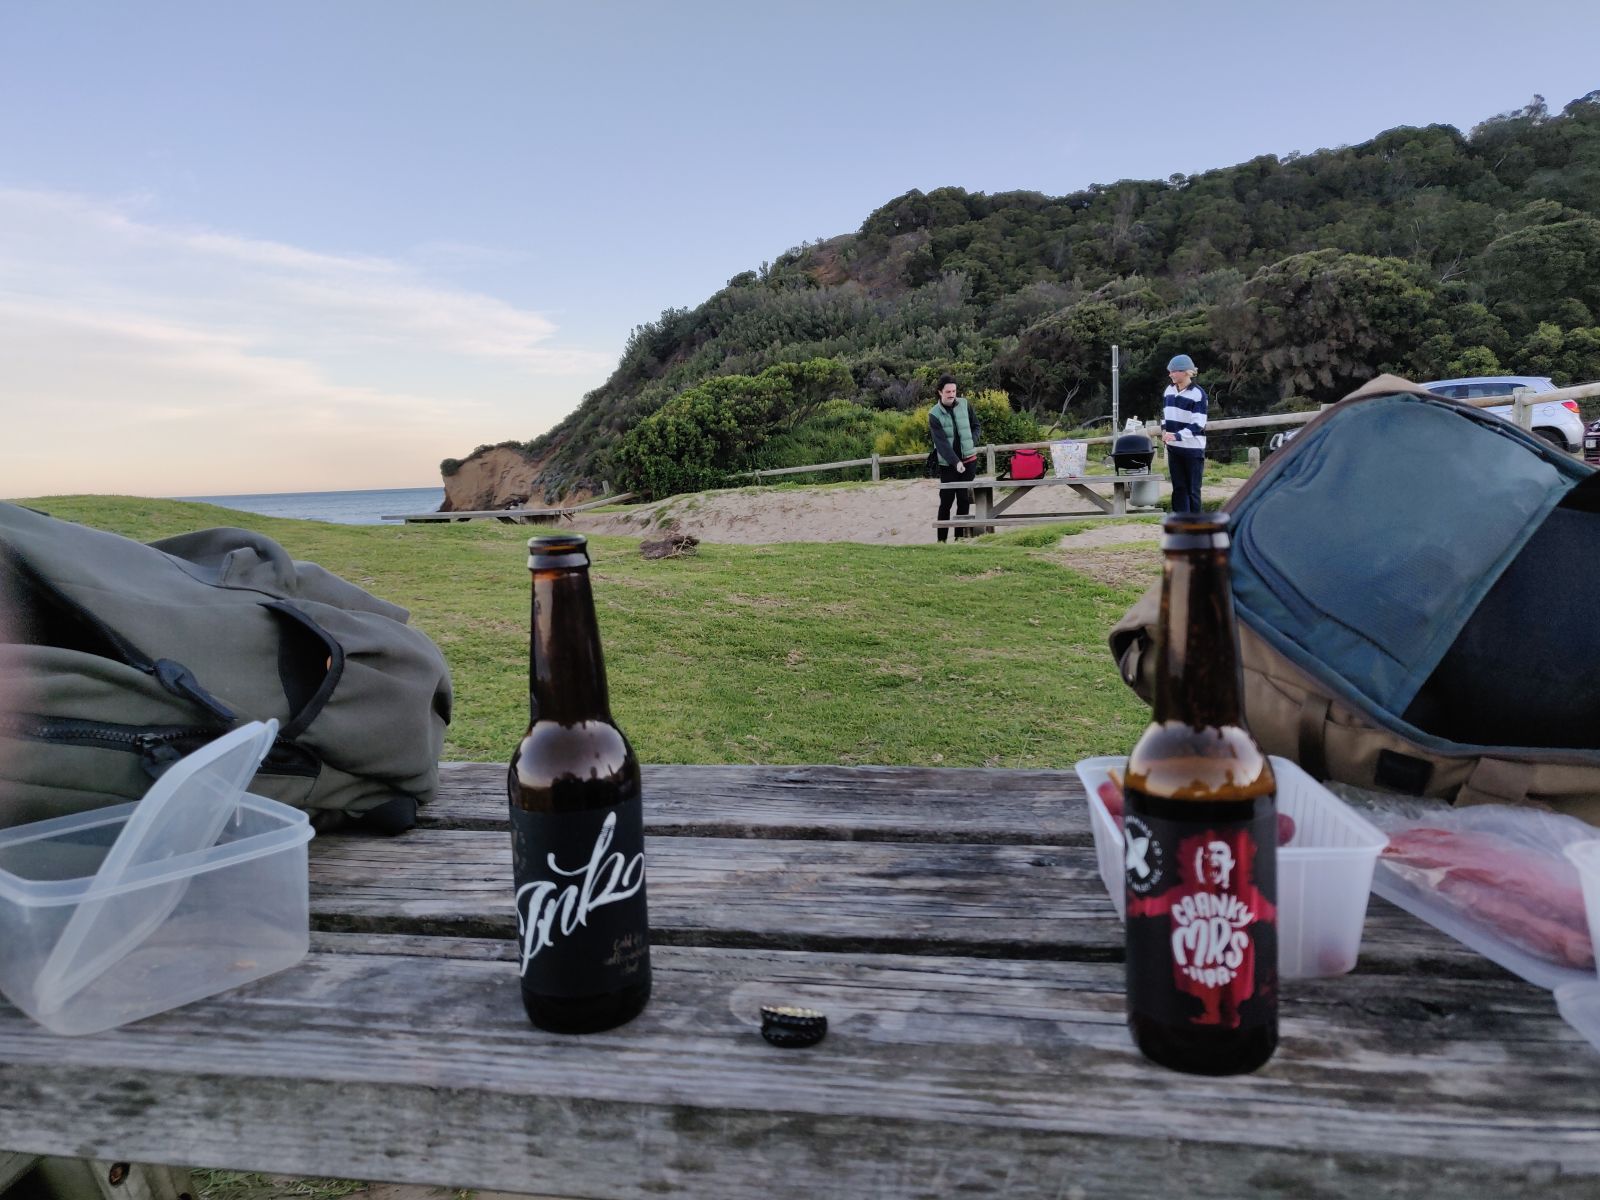 Local beers by the beach on the way home. This sort of chilling before the sun went down is what we bought with our early start